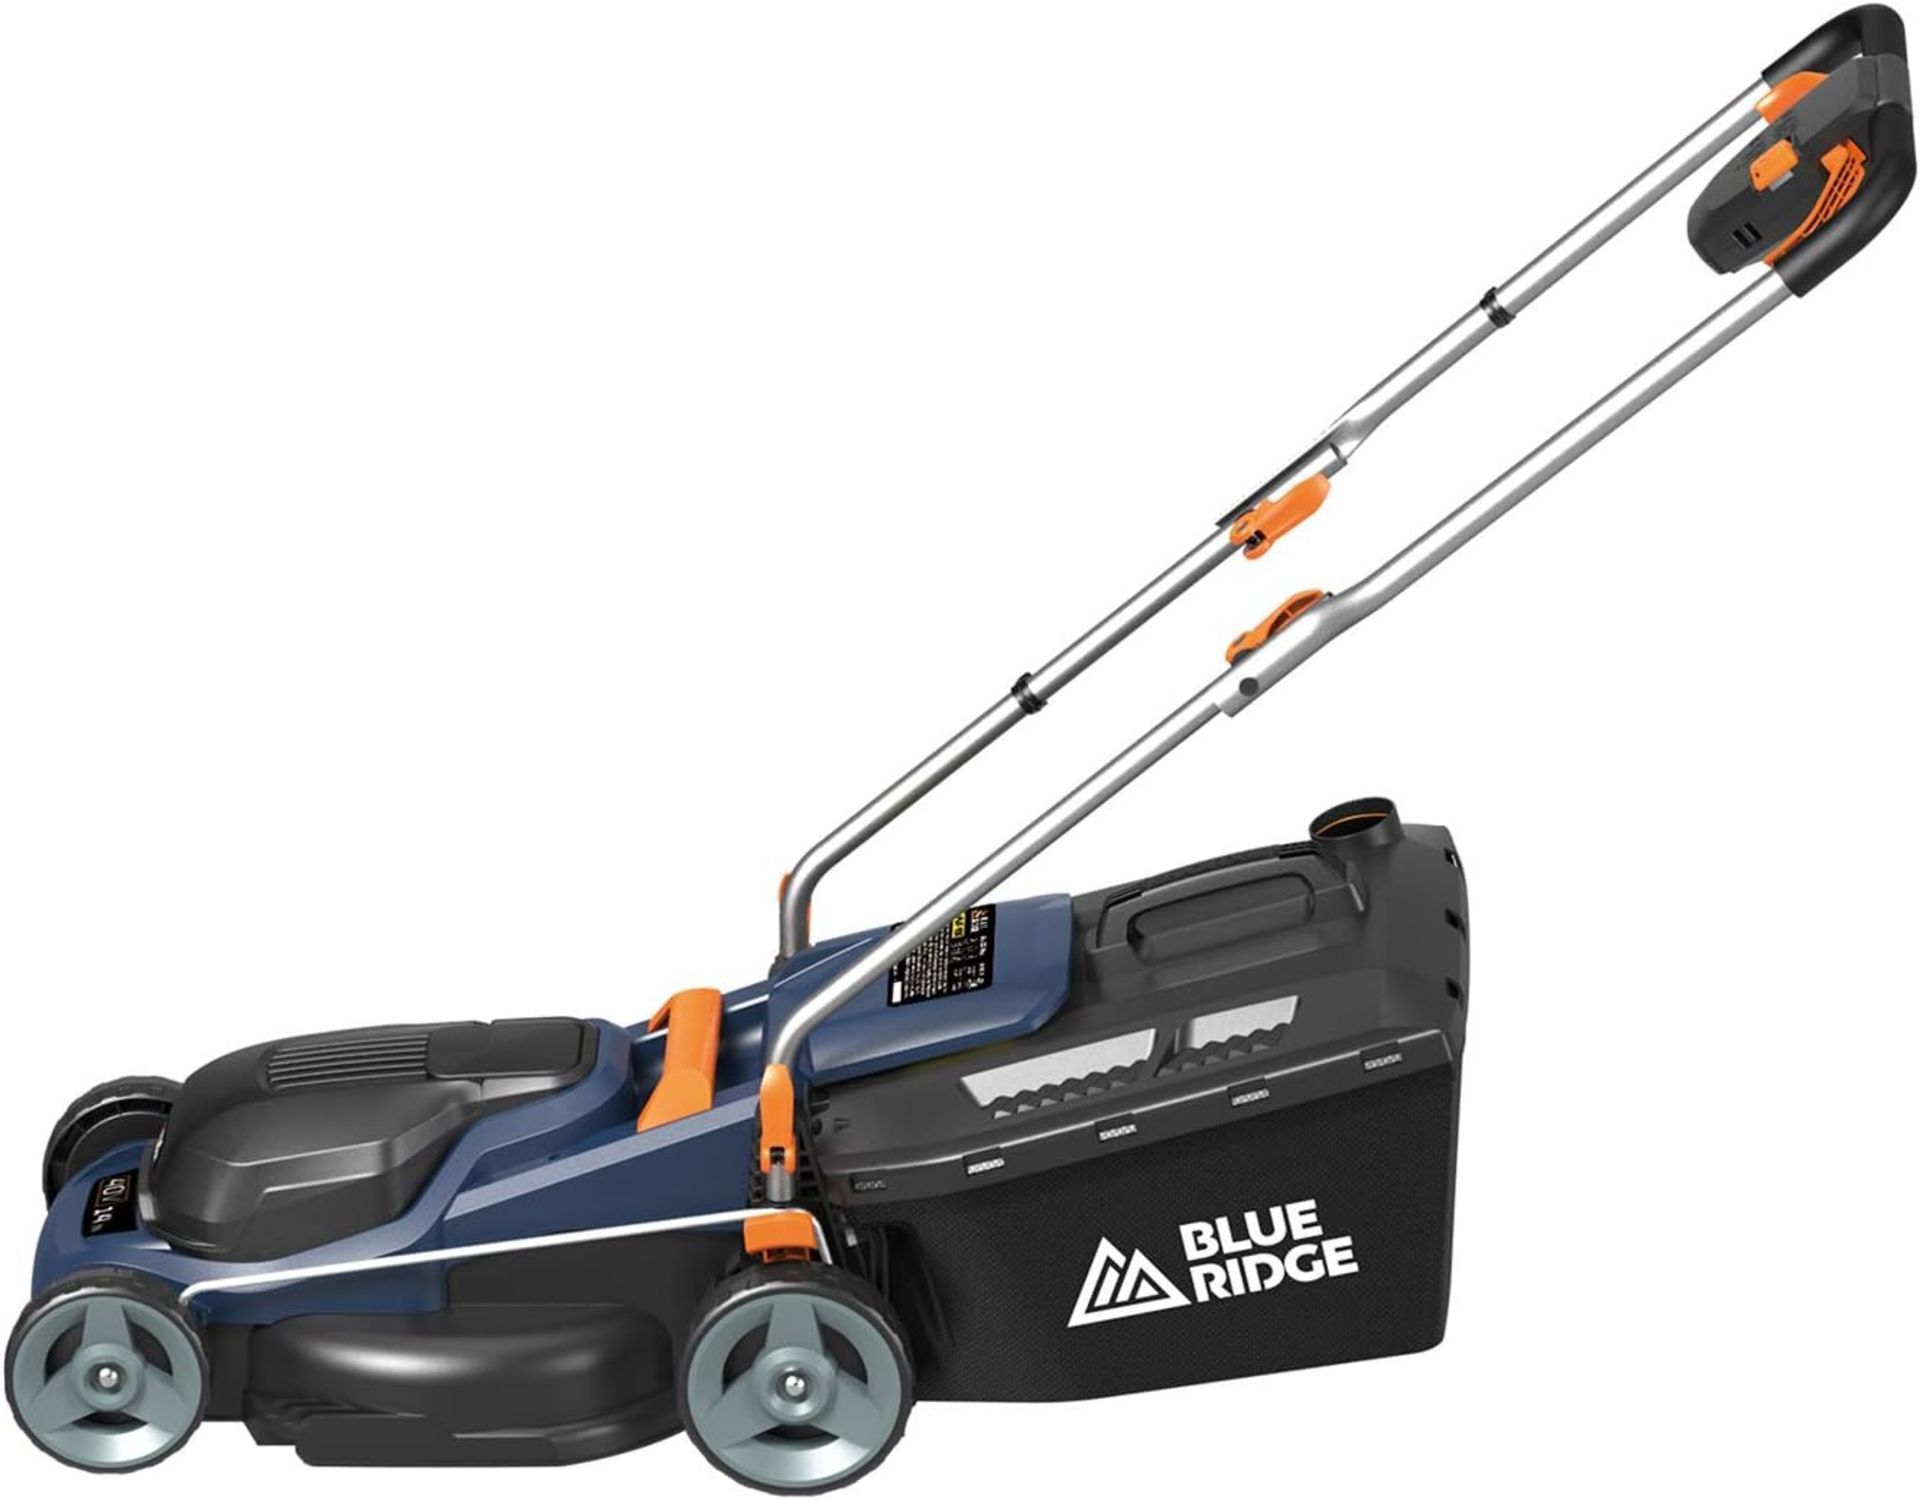 TRADE LOT TO CONTAIN 6x NEW & BOXED BLUE RIDGE 36V Cordless Lawnmower with 2.0 Ah Li-ion Battery. - Image 2 of 4